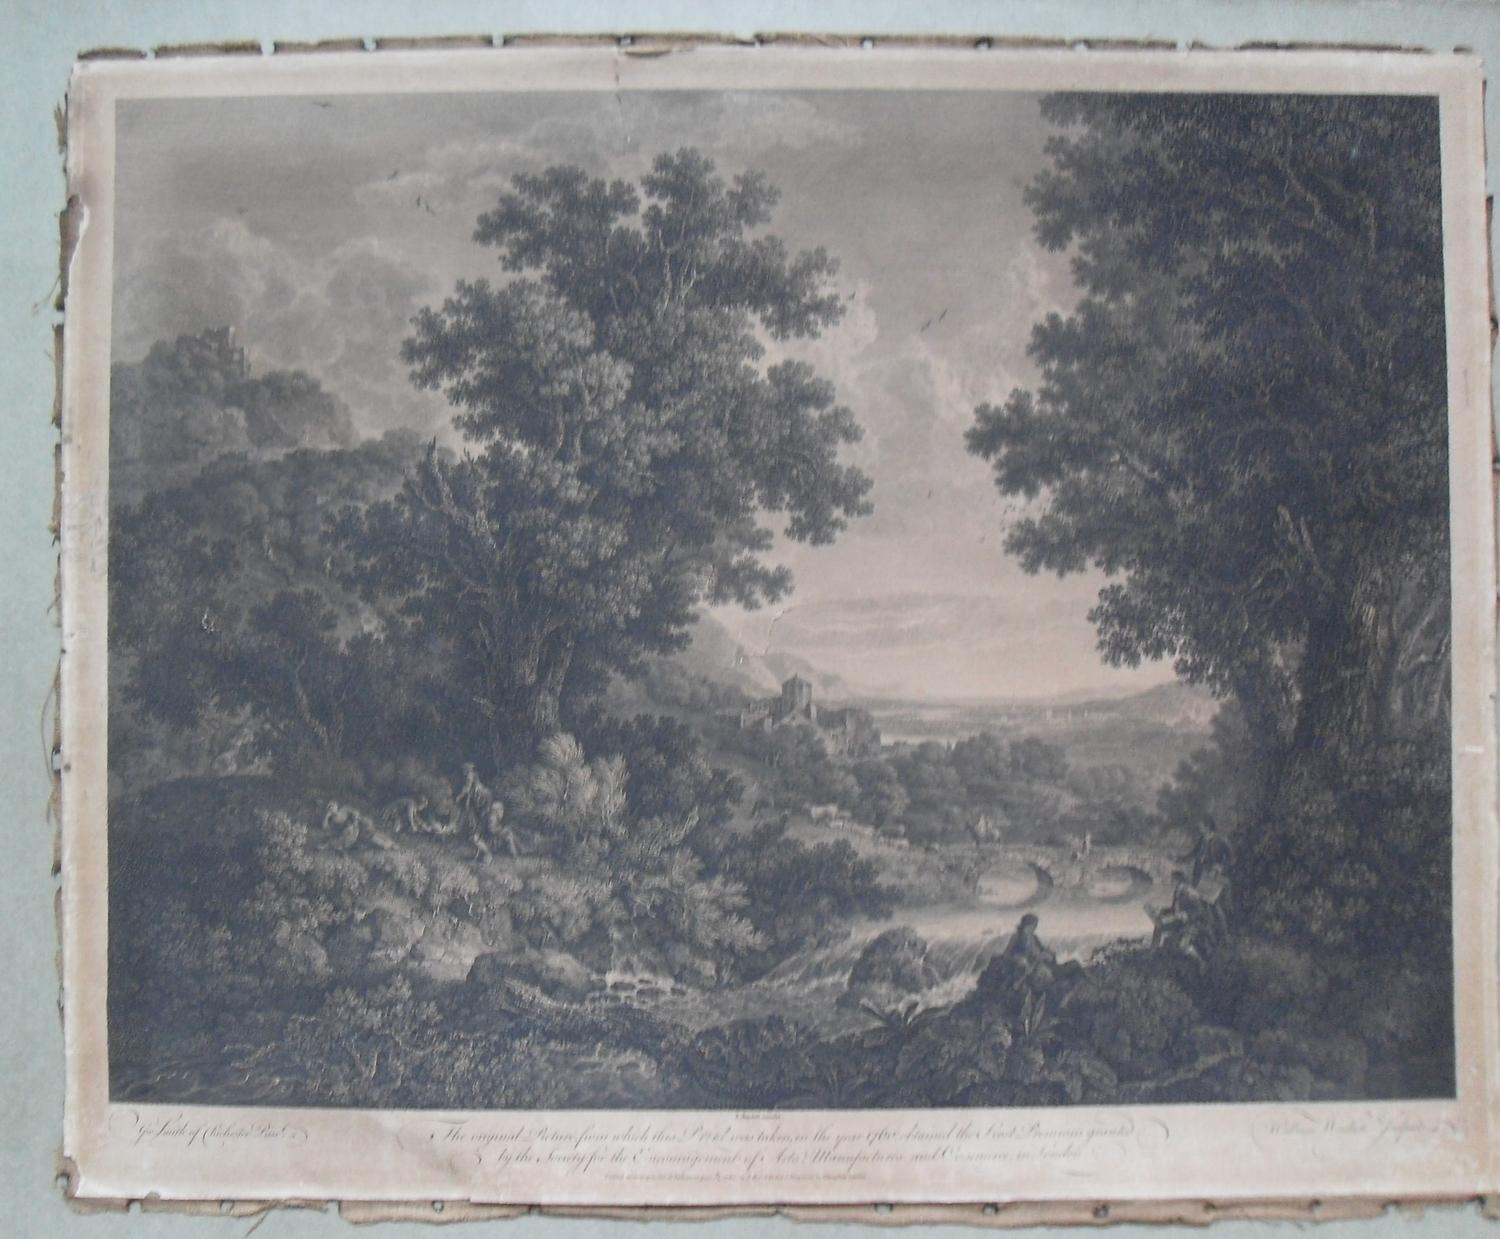 After George Smith of Chichester, line engraving, 'THE ORIGINAL PICTURE FROM WHICH THIS PICTURE